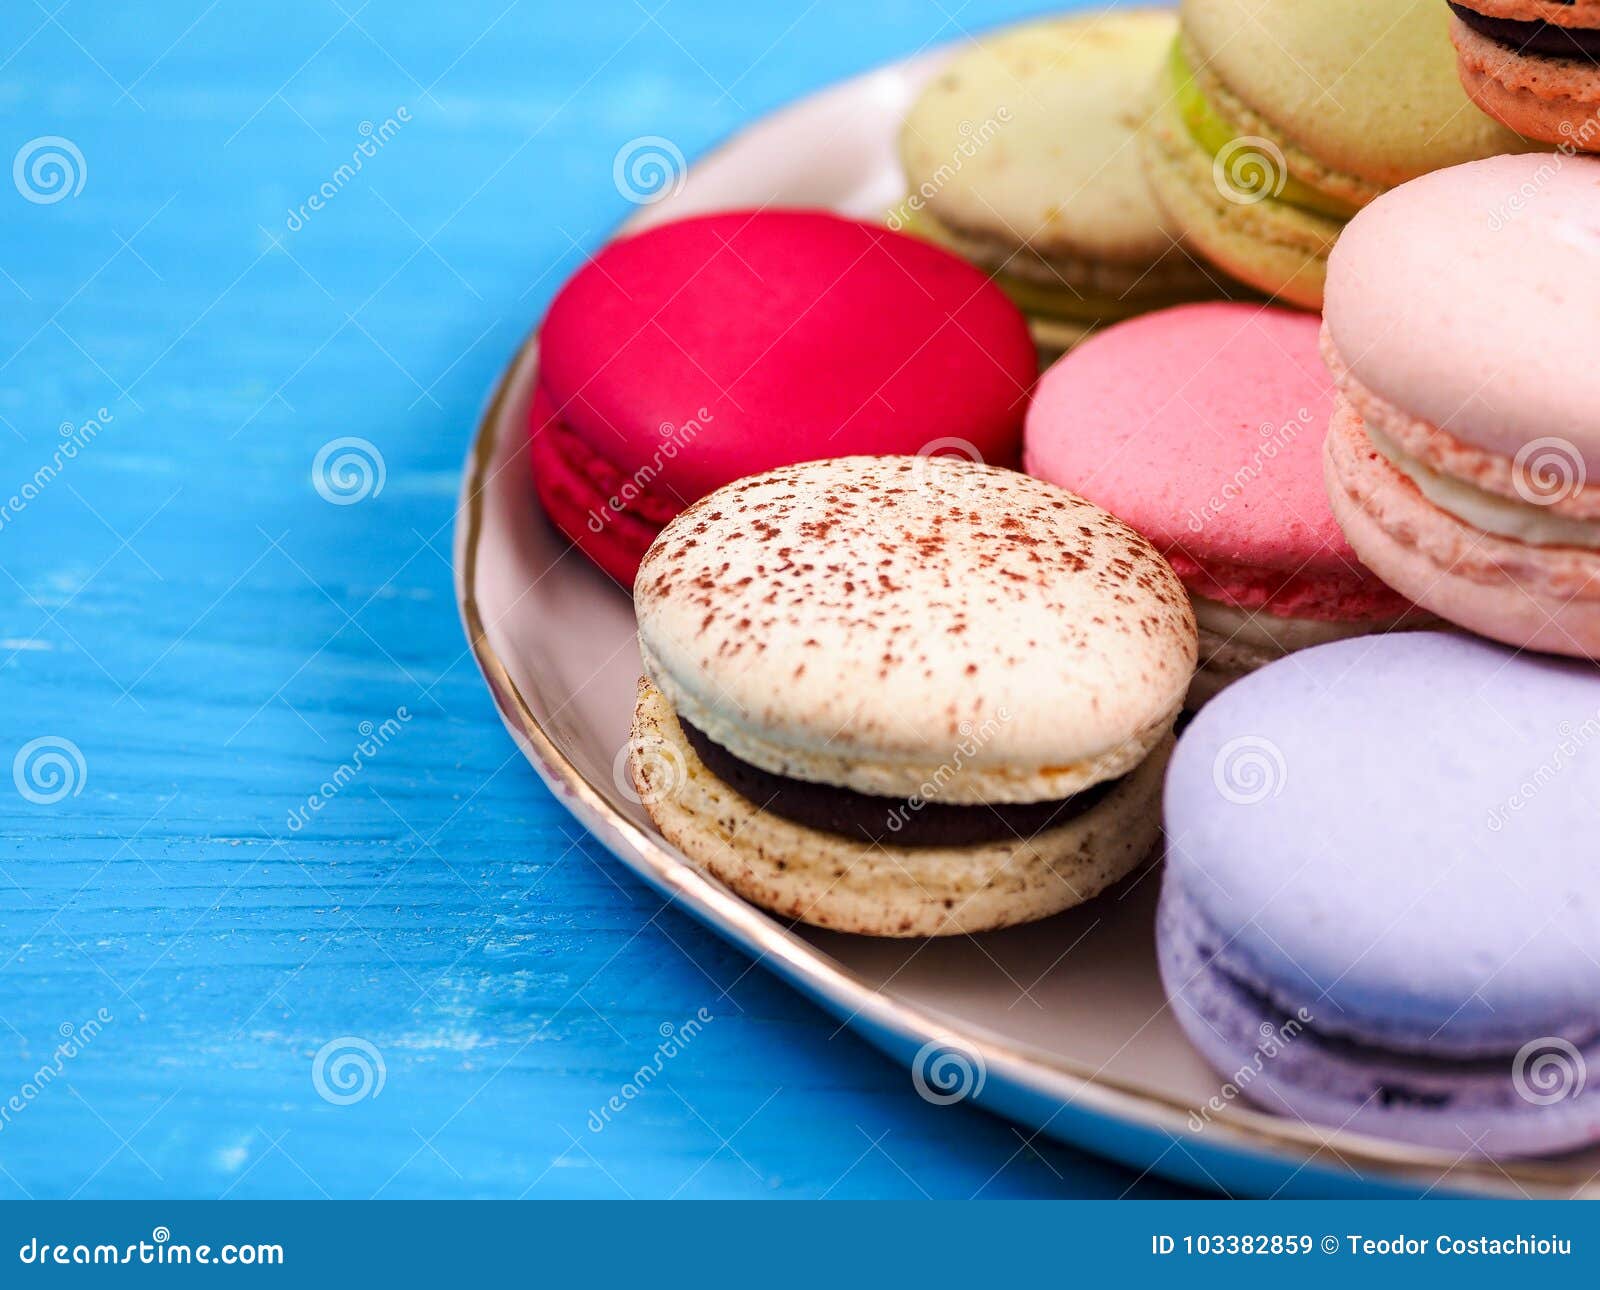 A Plate of Brightly Colored French Macarons Stock Image - Image of ...